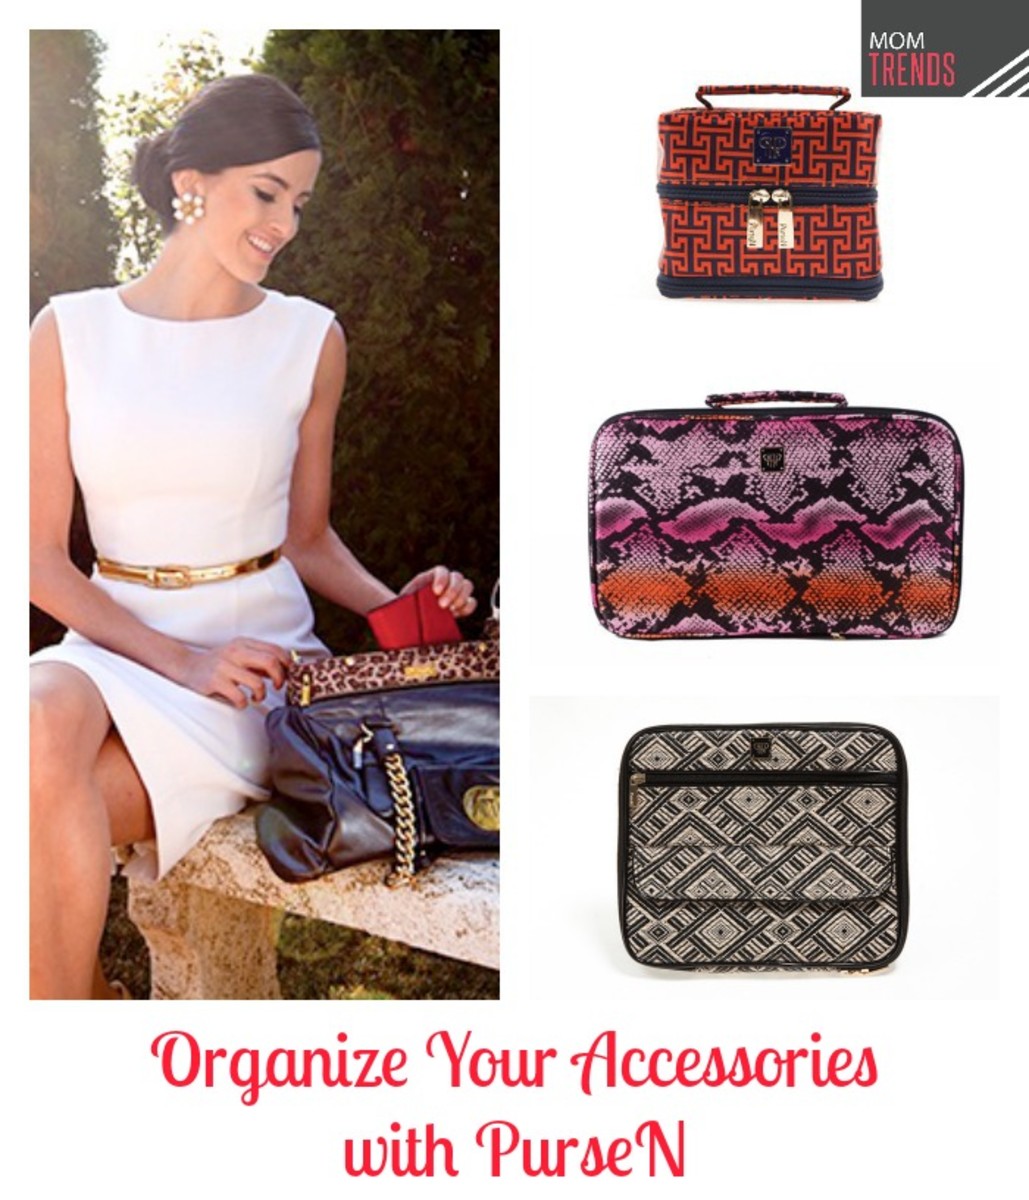 Organize Your Accessories with PurseN